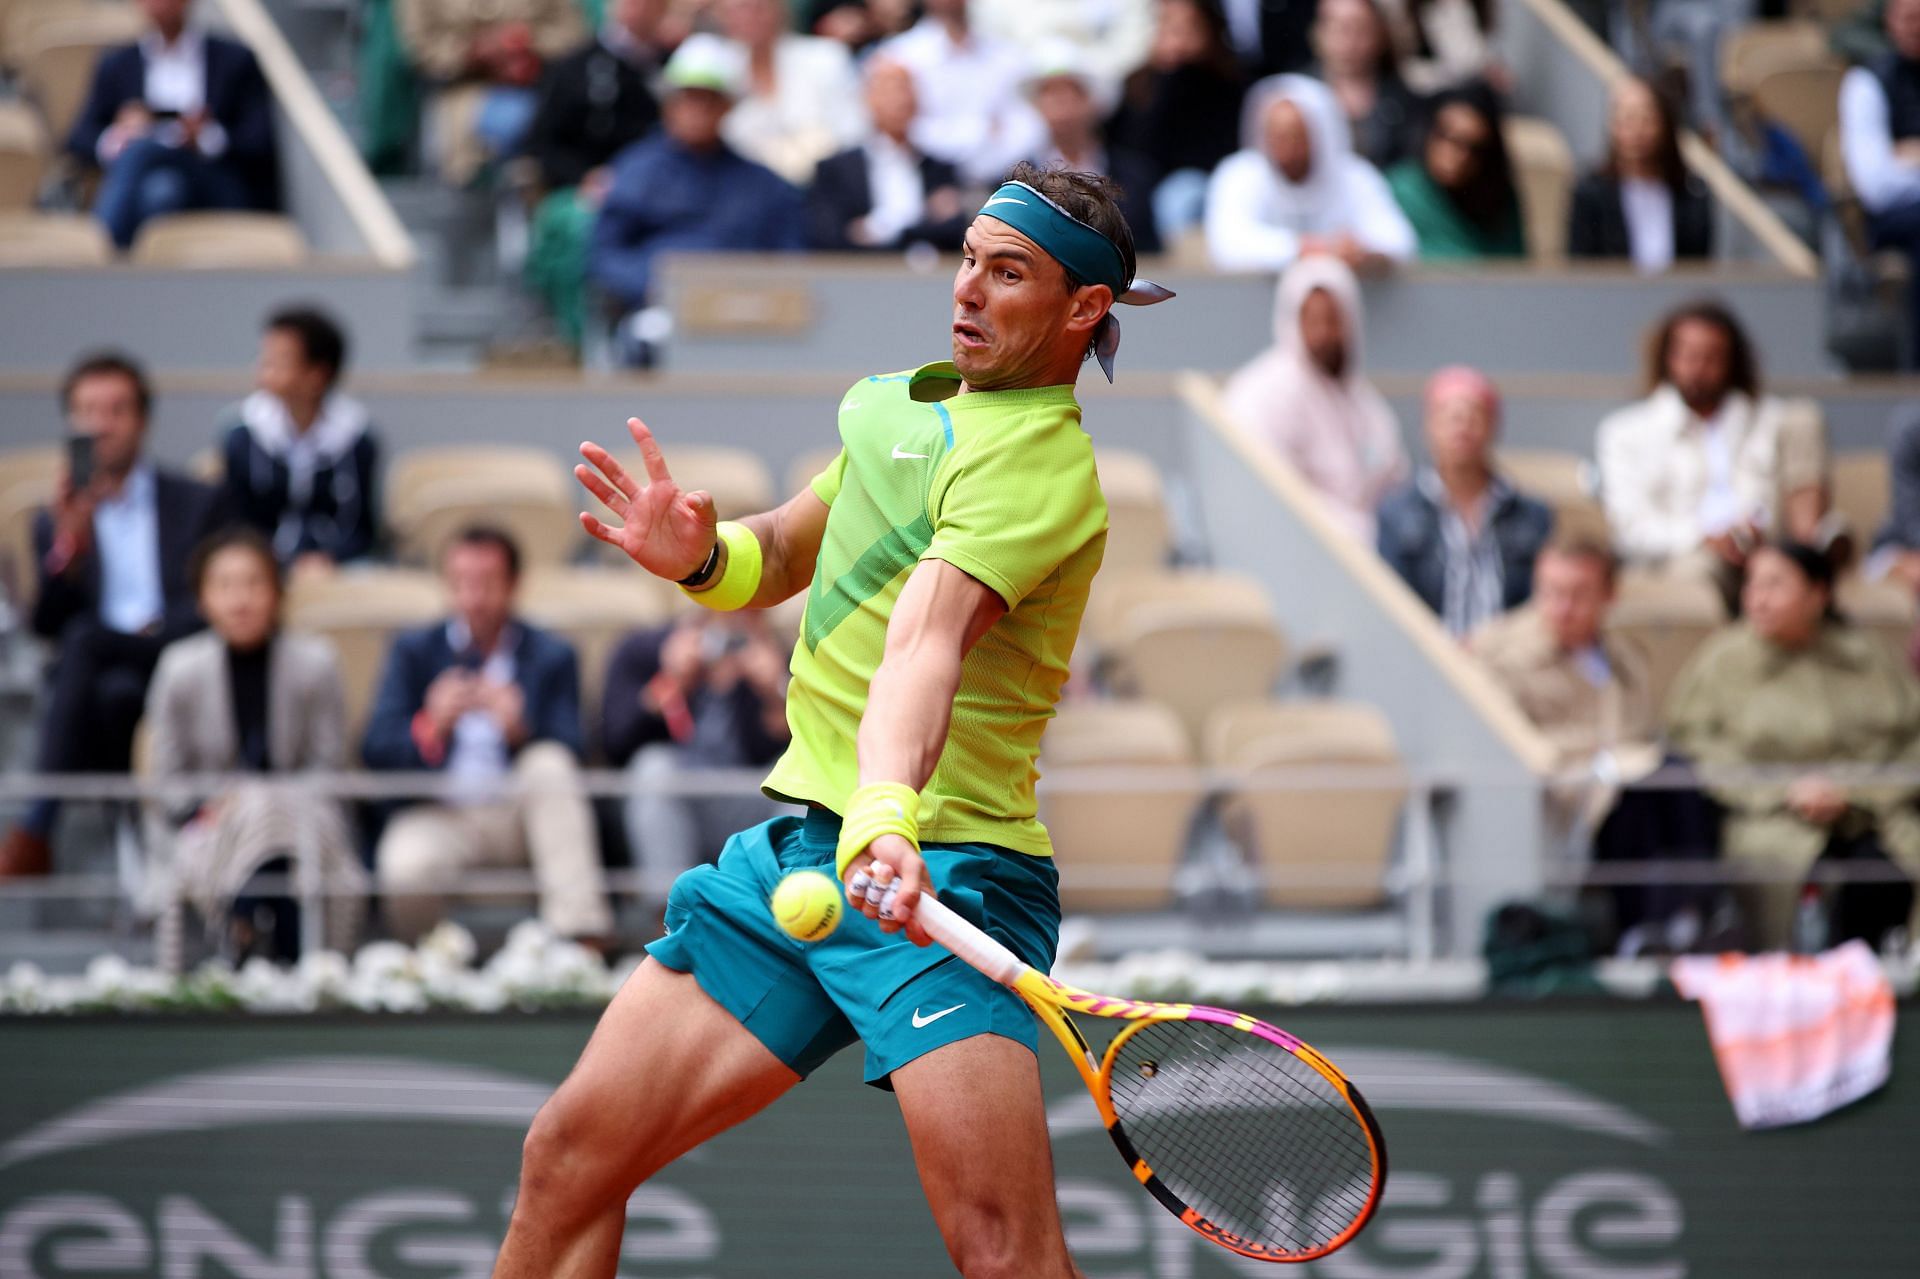 Rafael Nadal takes on Corentin Moutet in the second round of the 2022 French Open